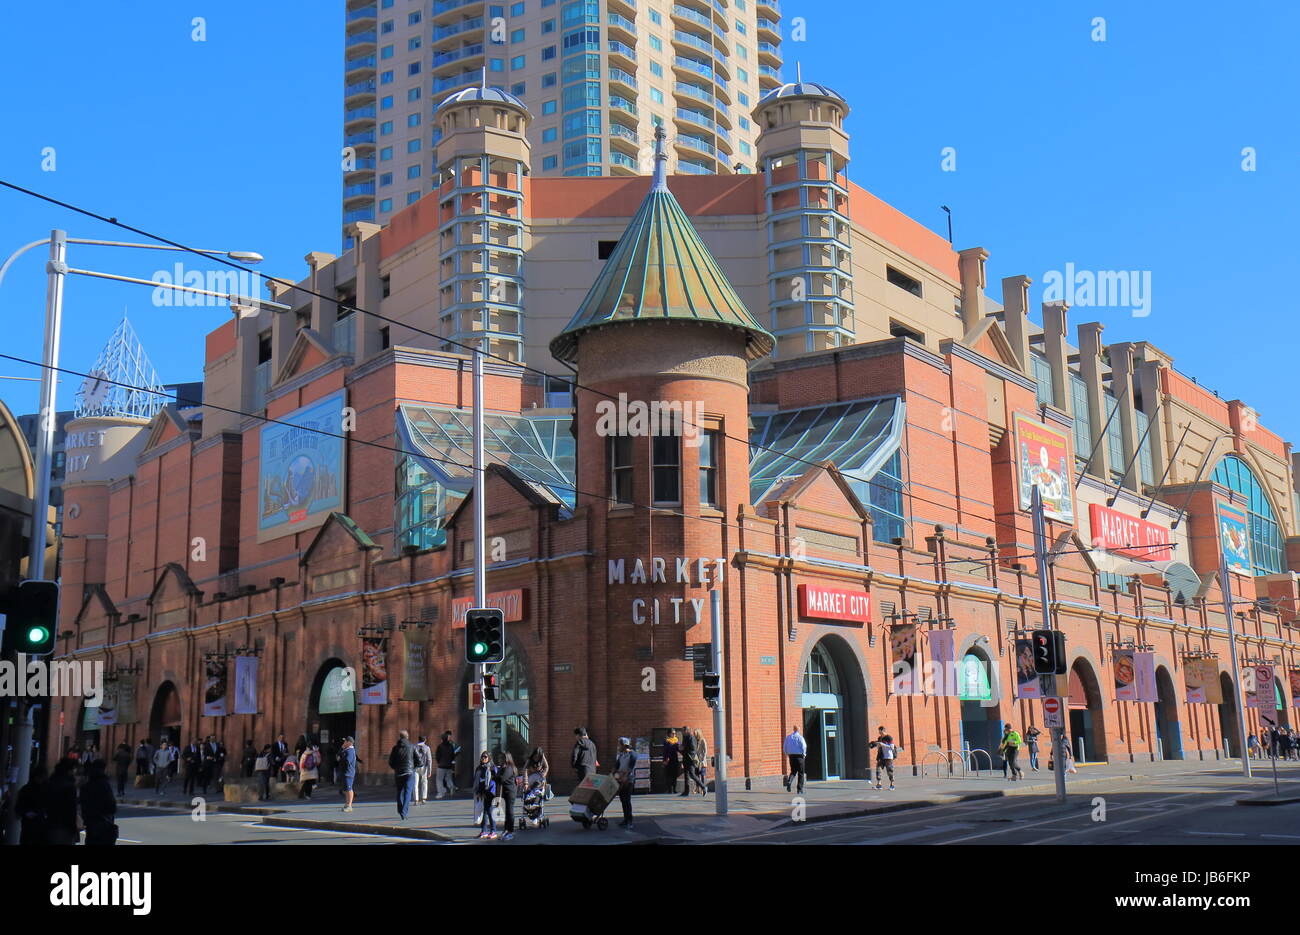 People visit Paddys market in Chinatown in Sydney Australia. Stock Photo